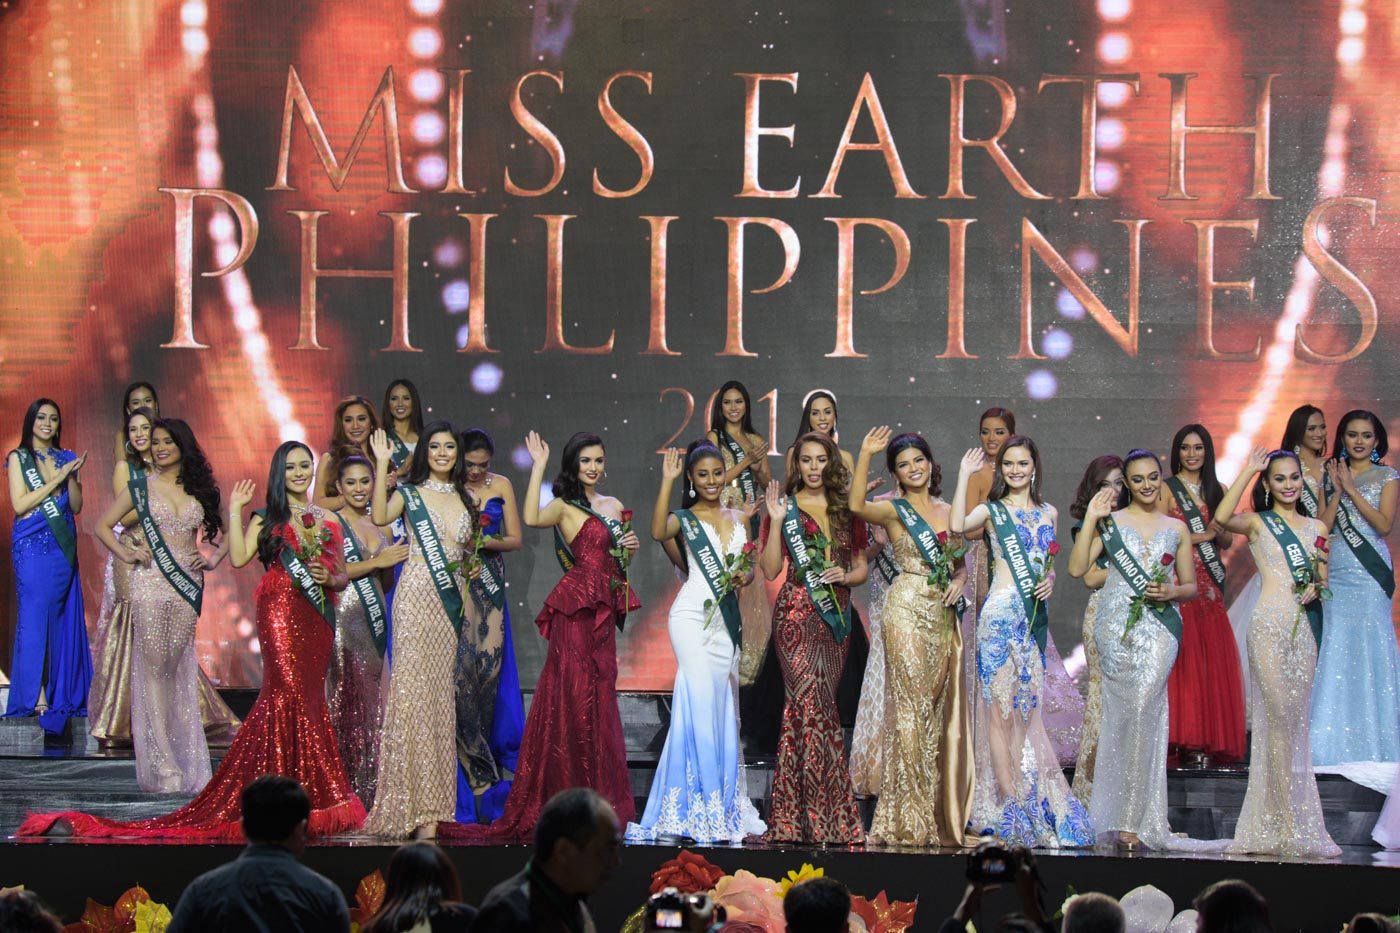 IN PHOTOS: Miss Earth Philippines 2018, evening gown segment